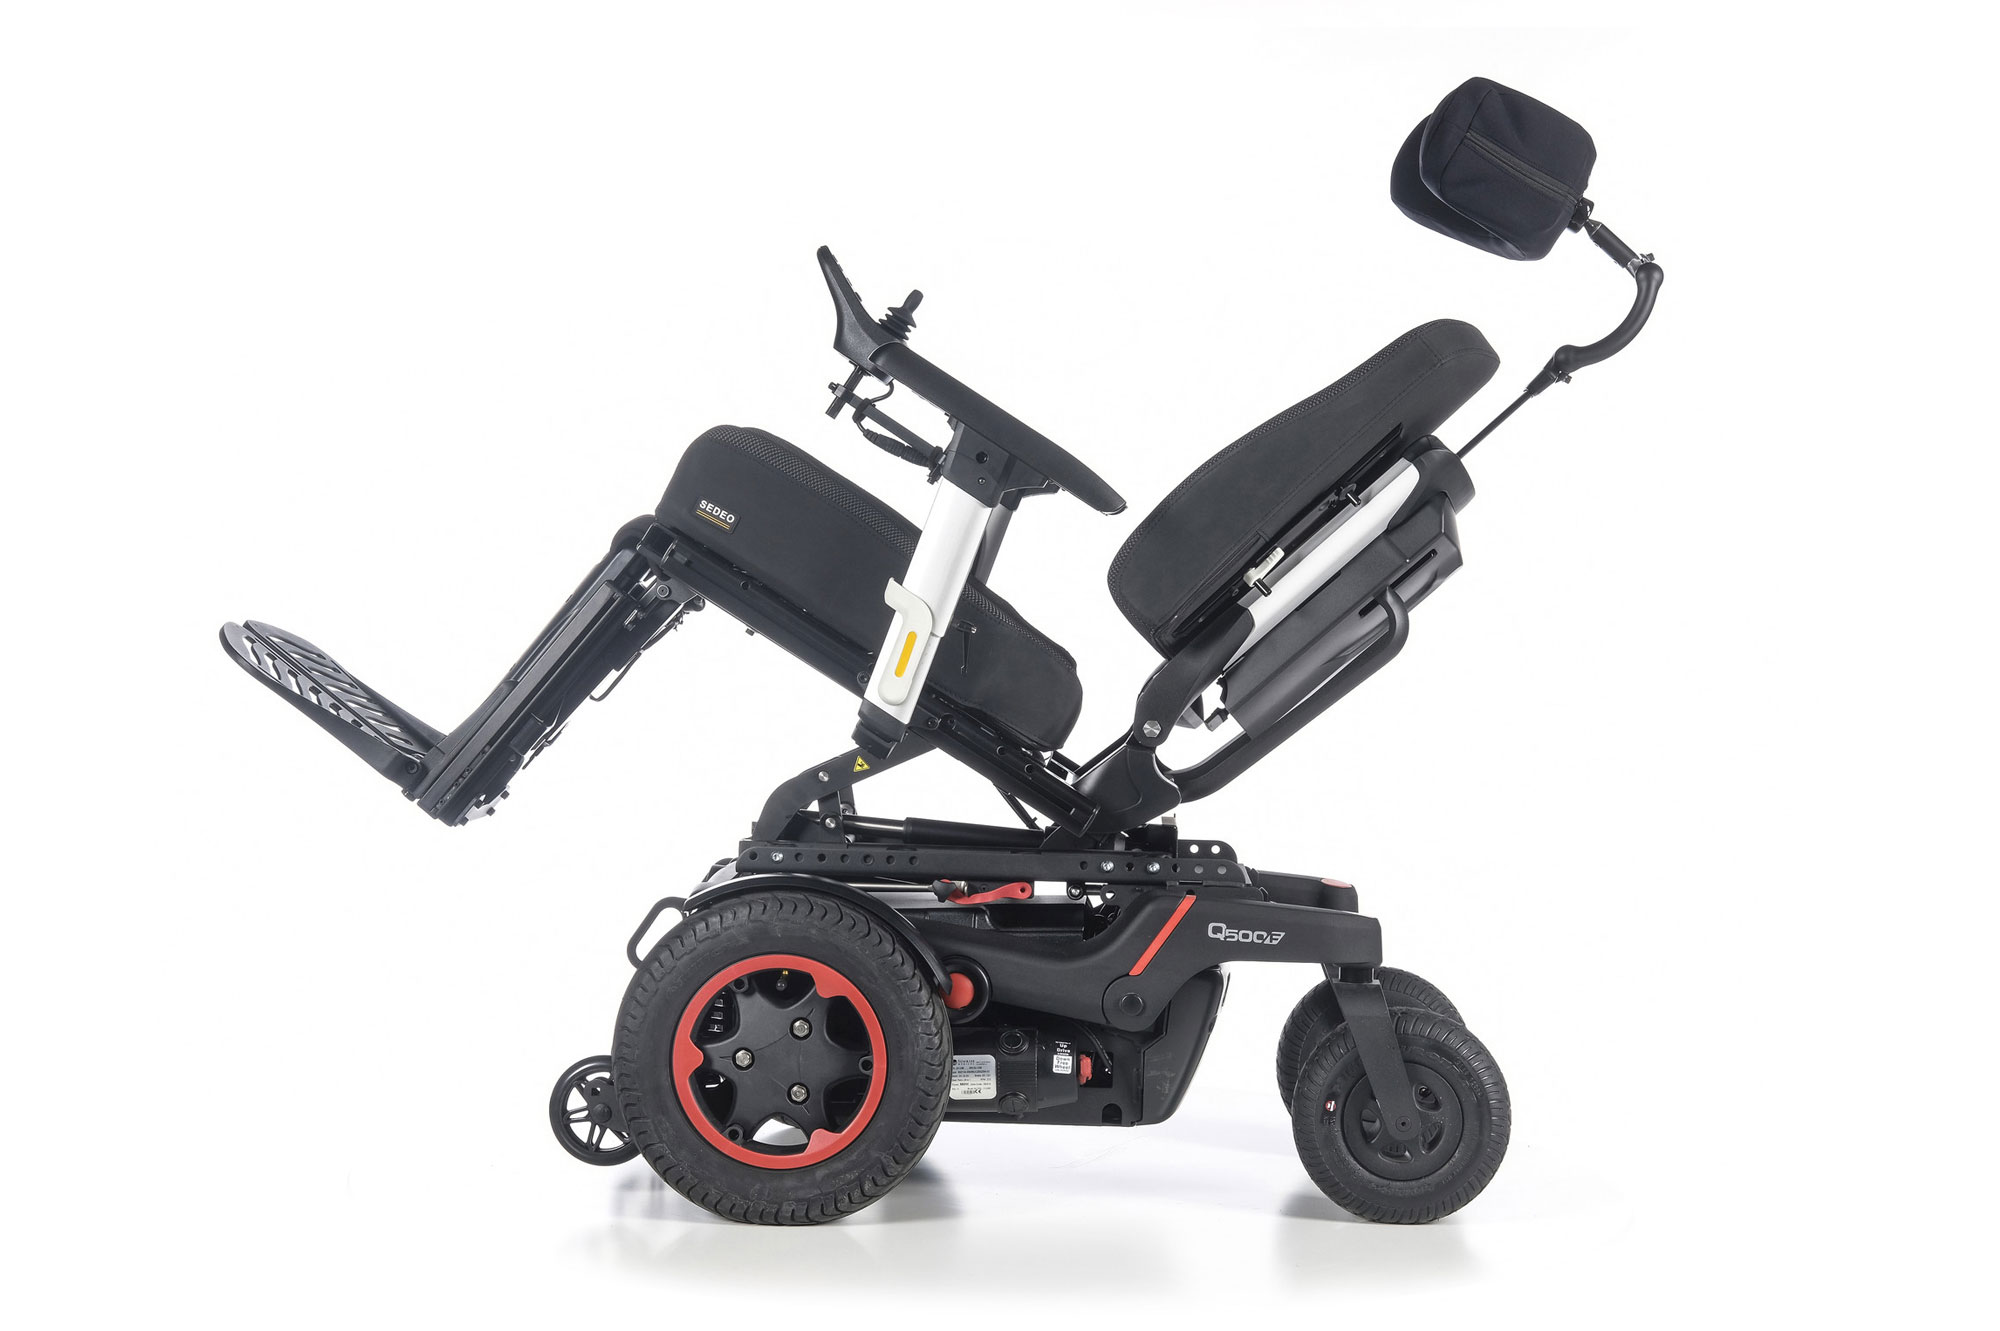 Quickie Q500 F SEDEO PRO Front-Wheel Powered Wheelchair